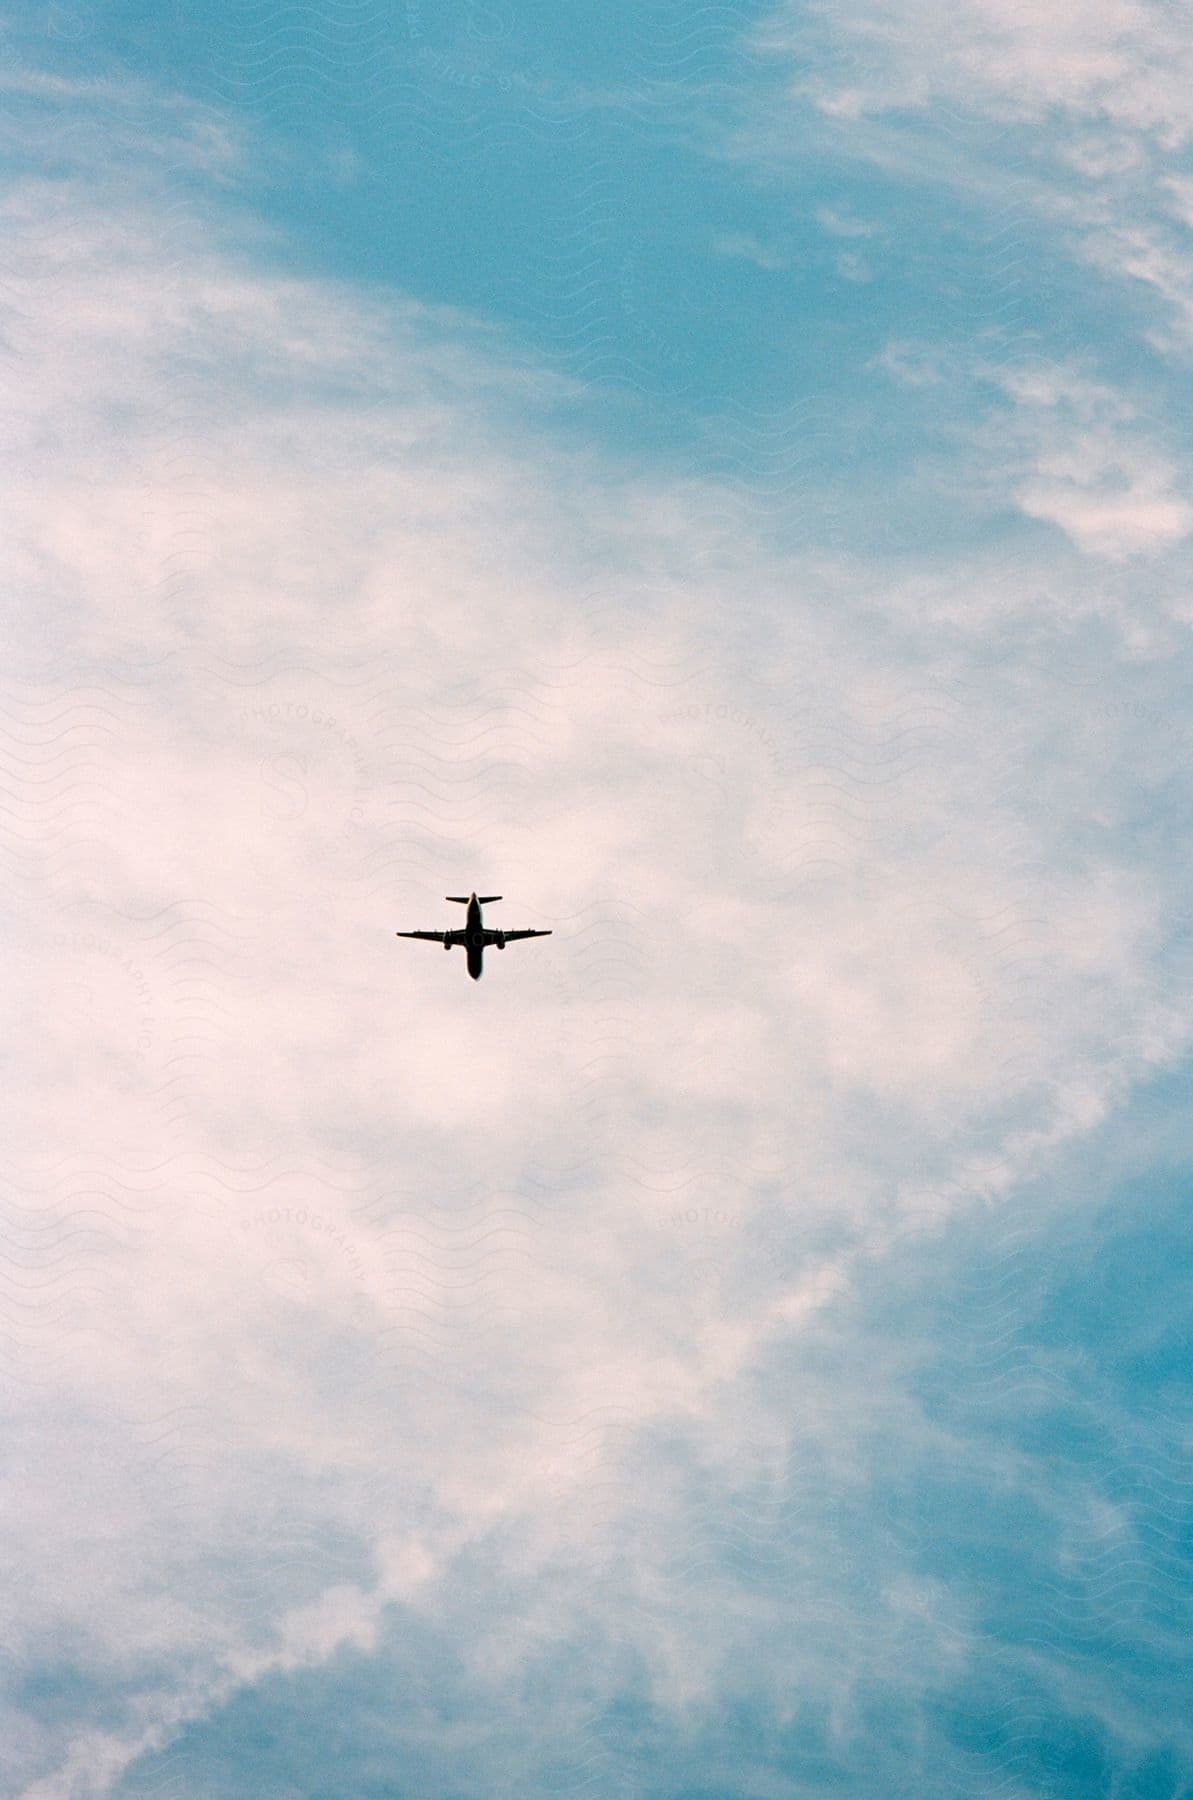 An airplane flying high in a partially cloudy sky